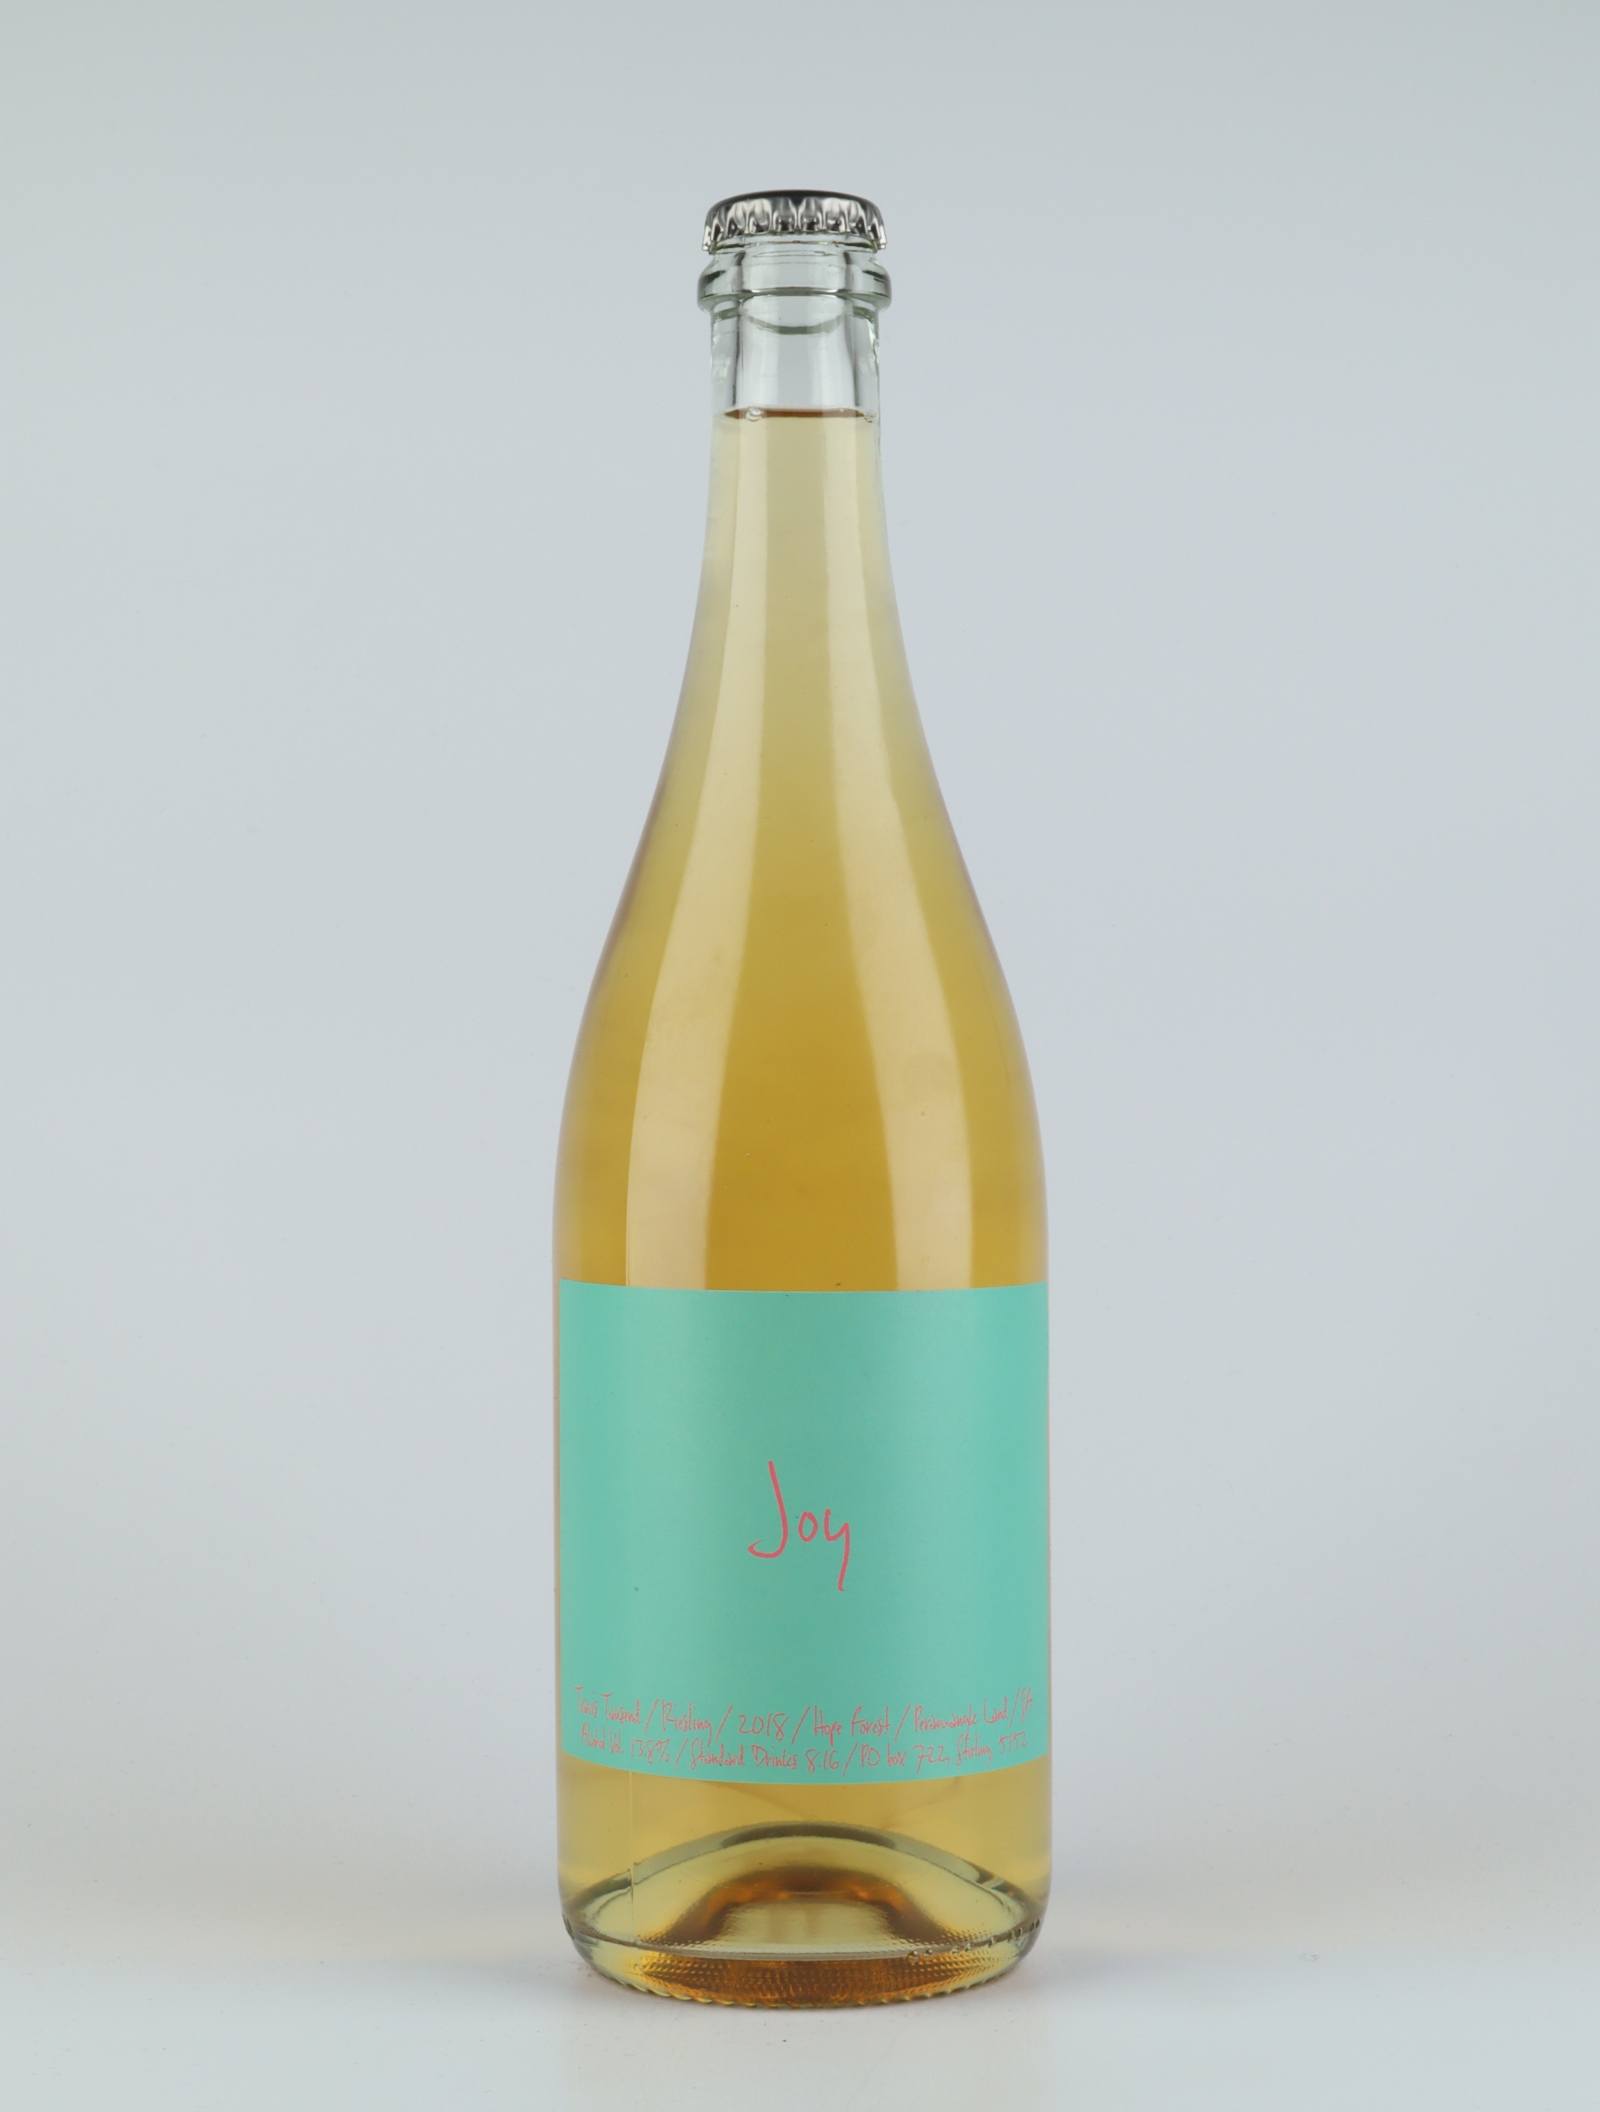 A bottle 2018 Joy Riesling White wine from Travis Tausend, Adelaide Hills in Australia